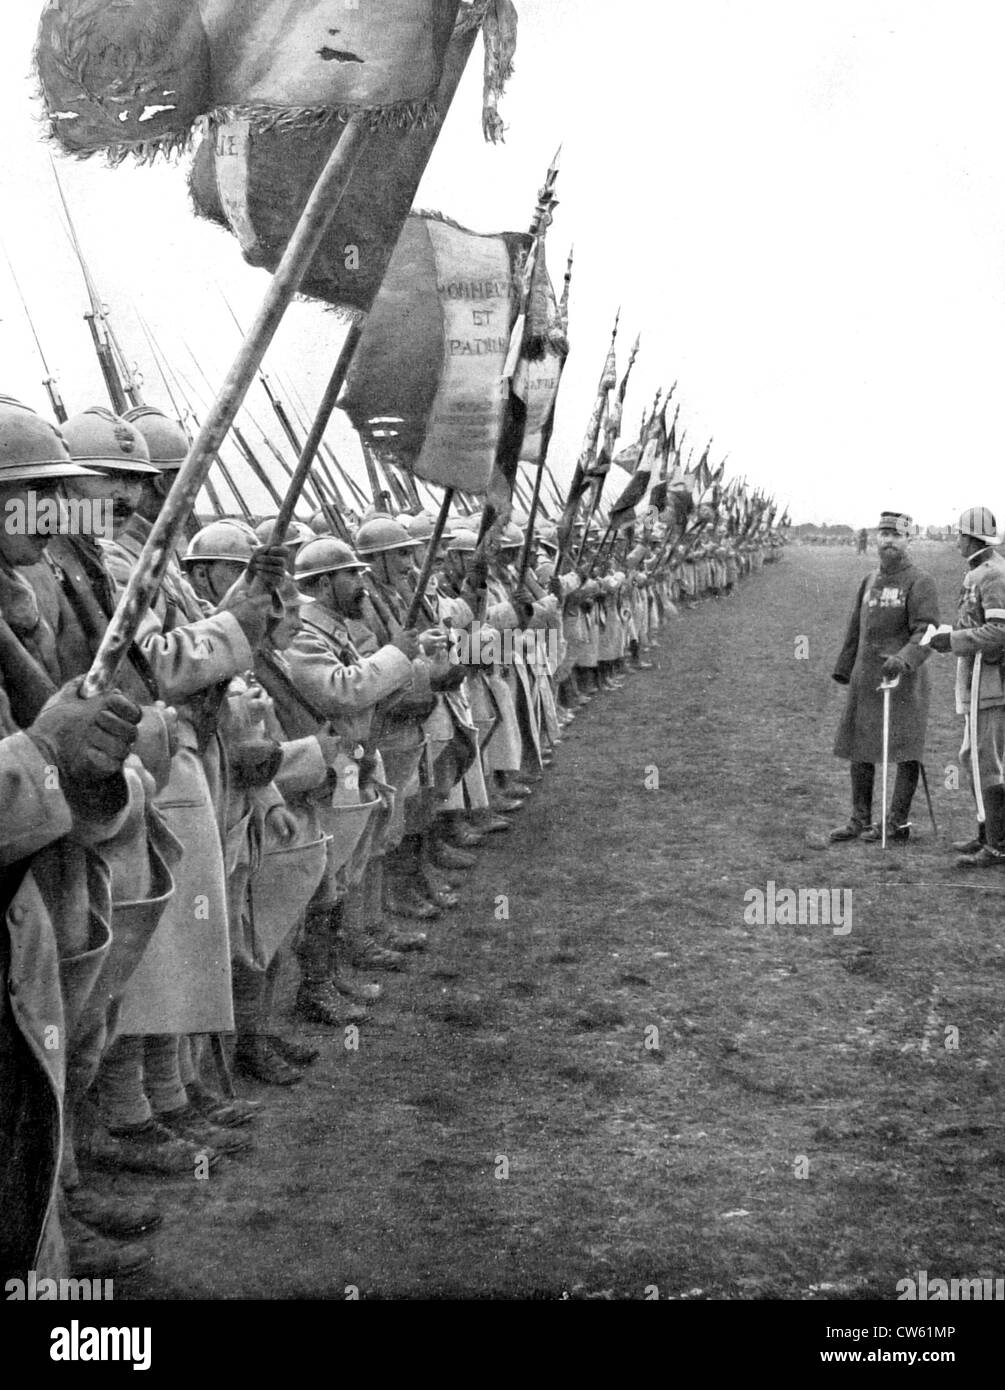 General Gouraud has gathered flags of all regiments of his army to salute a division who won battles in Verdun (1916) Stock Photo